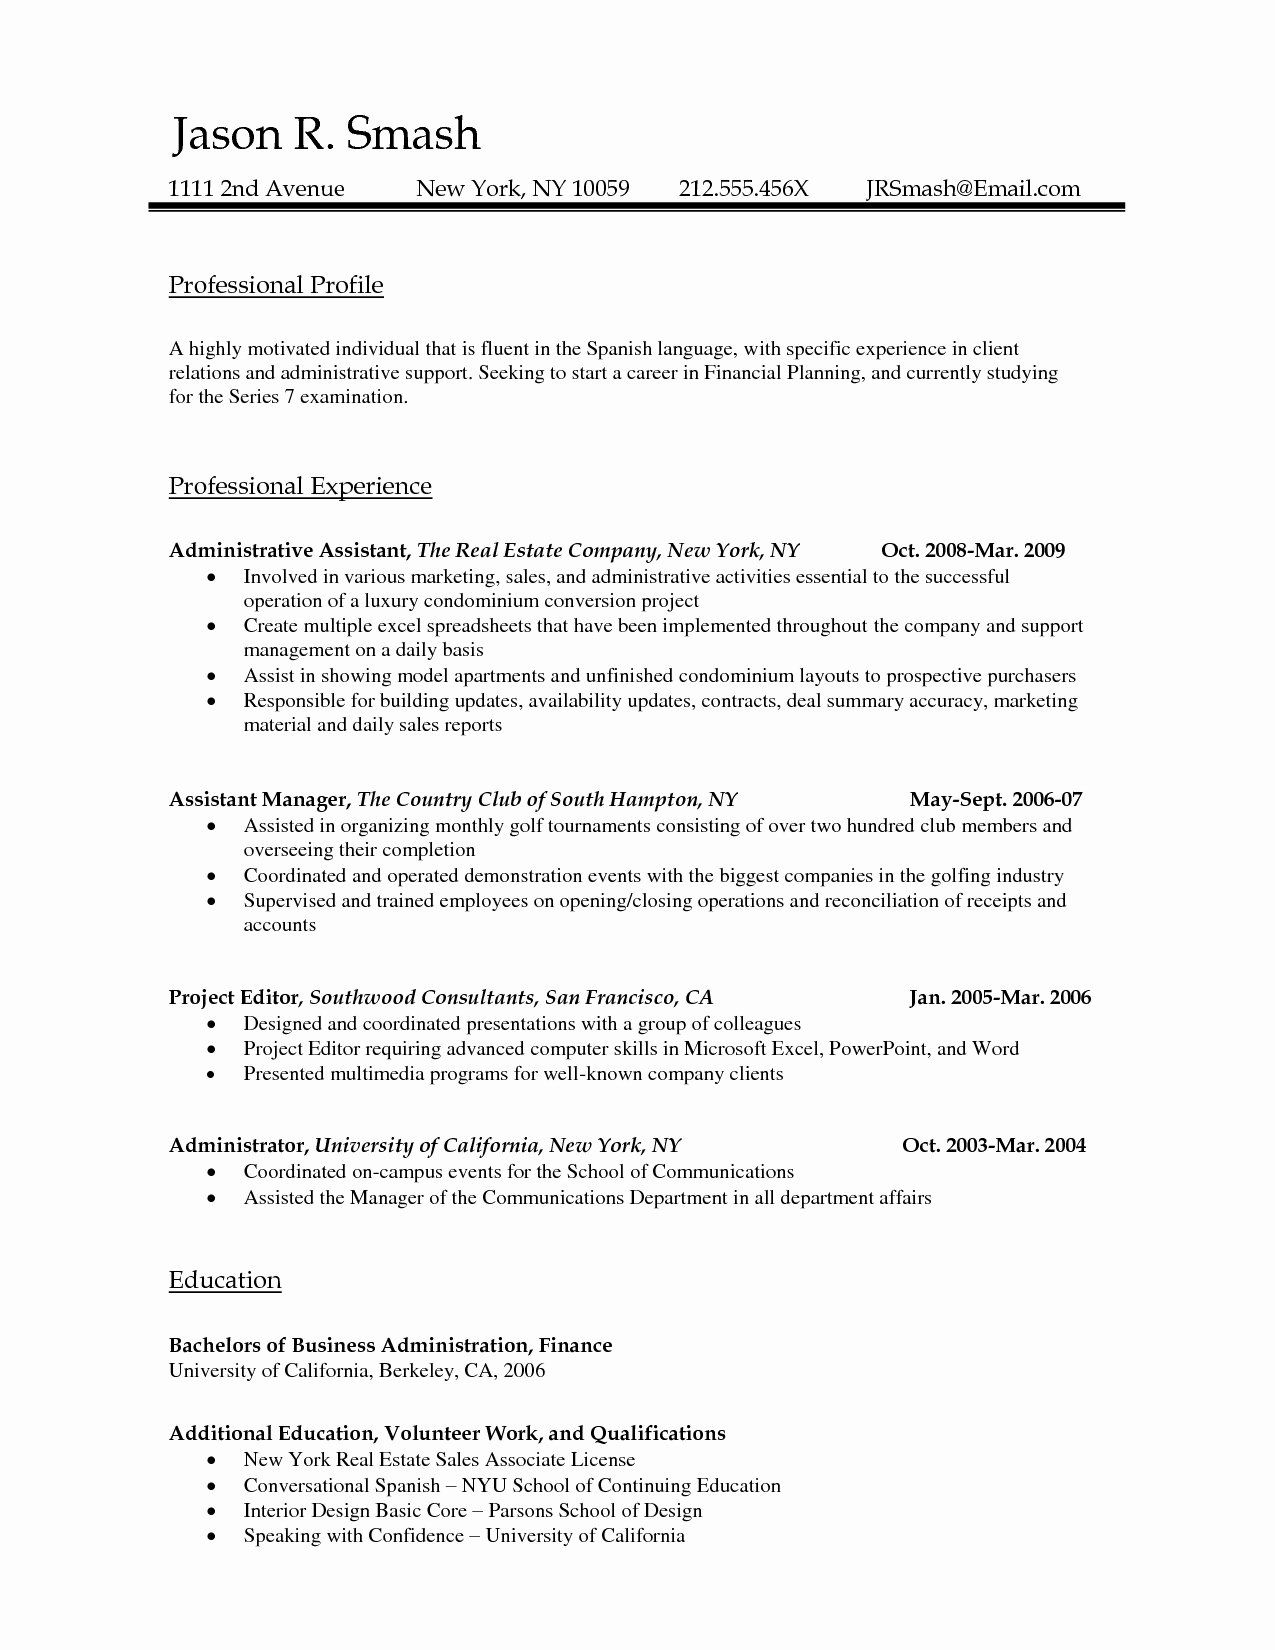 Resume Templates for Microsoft Word 2010 How to Create A